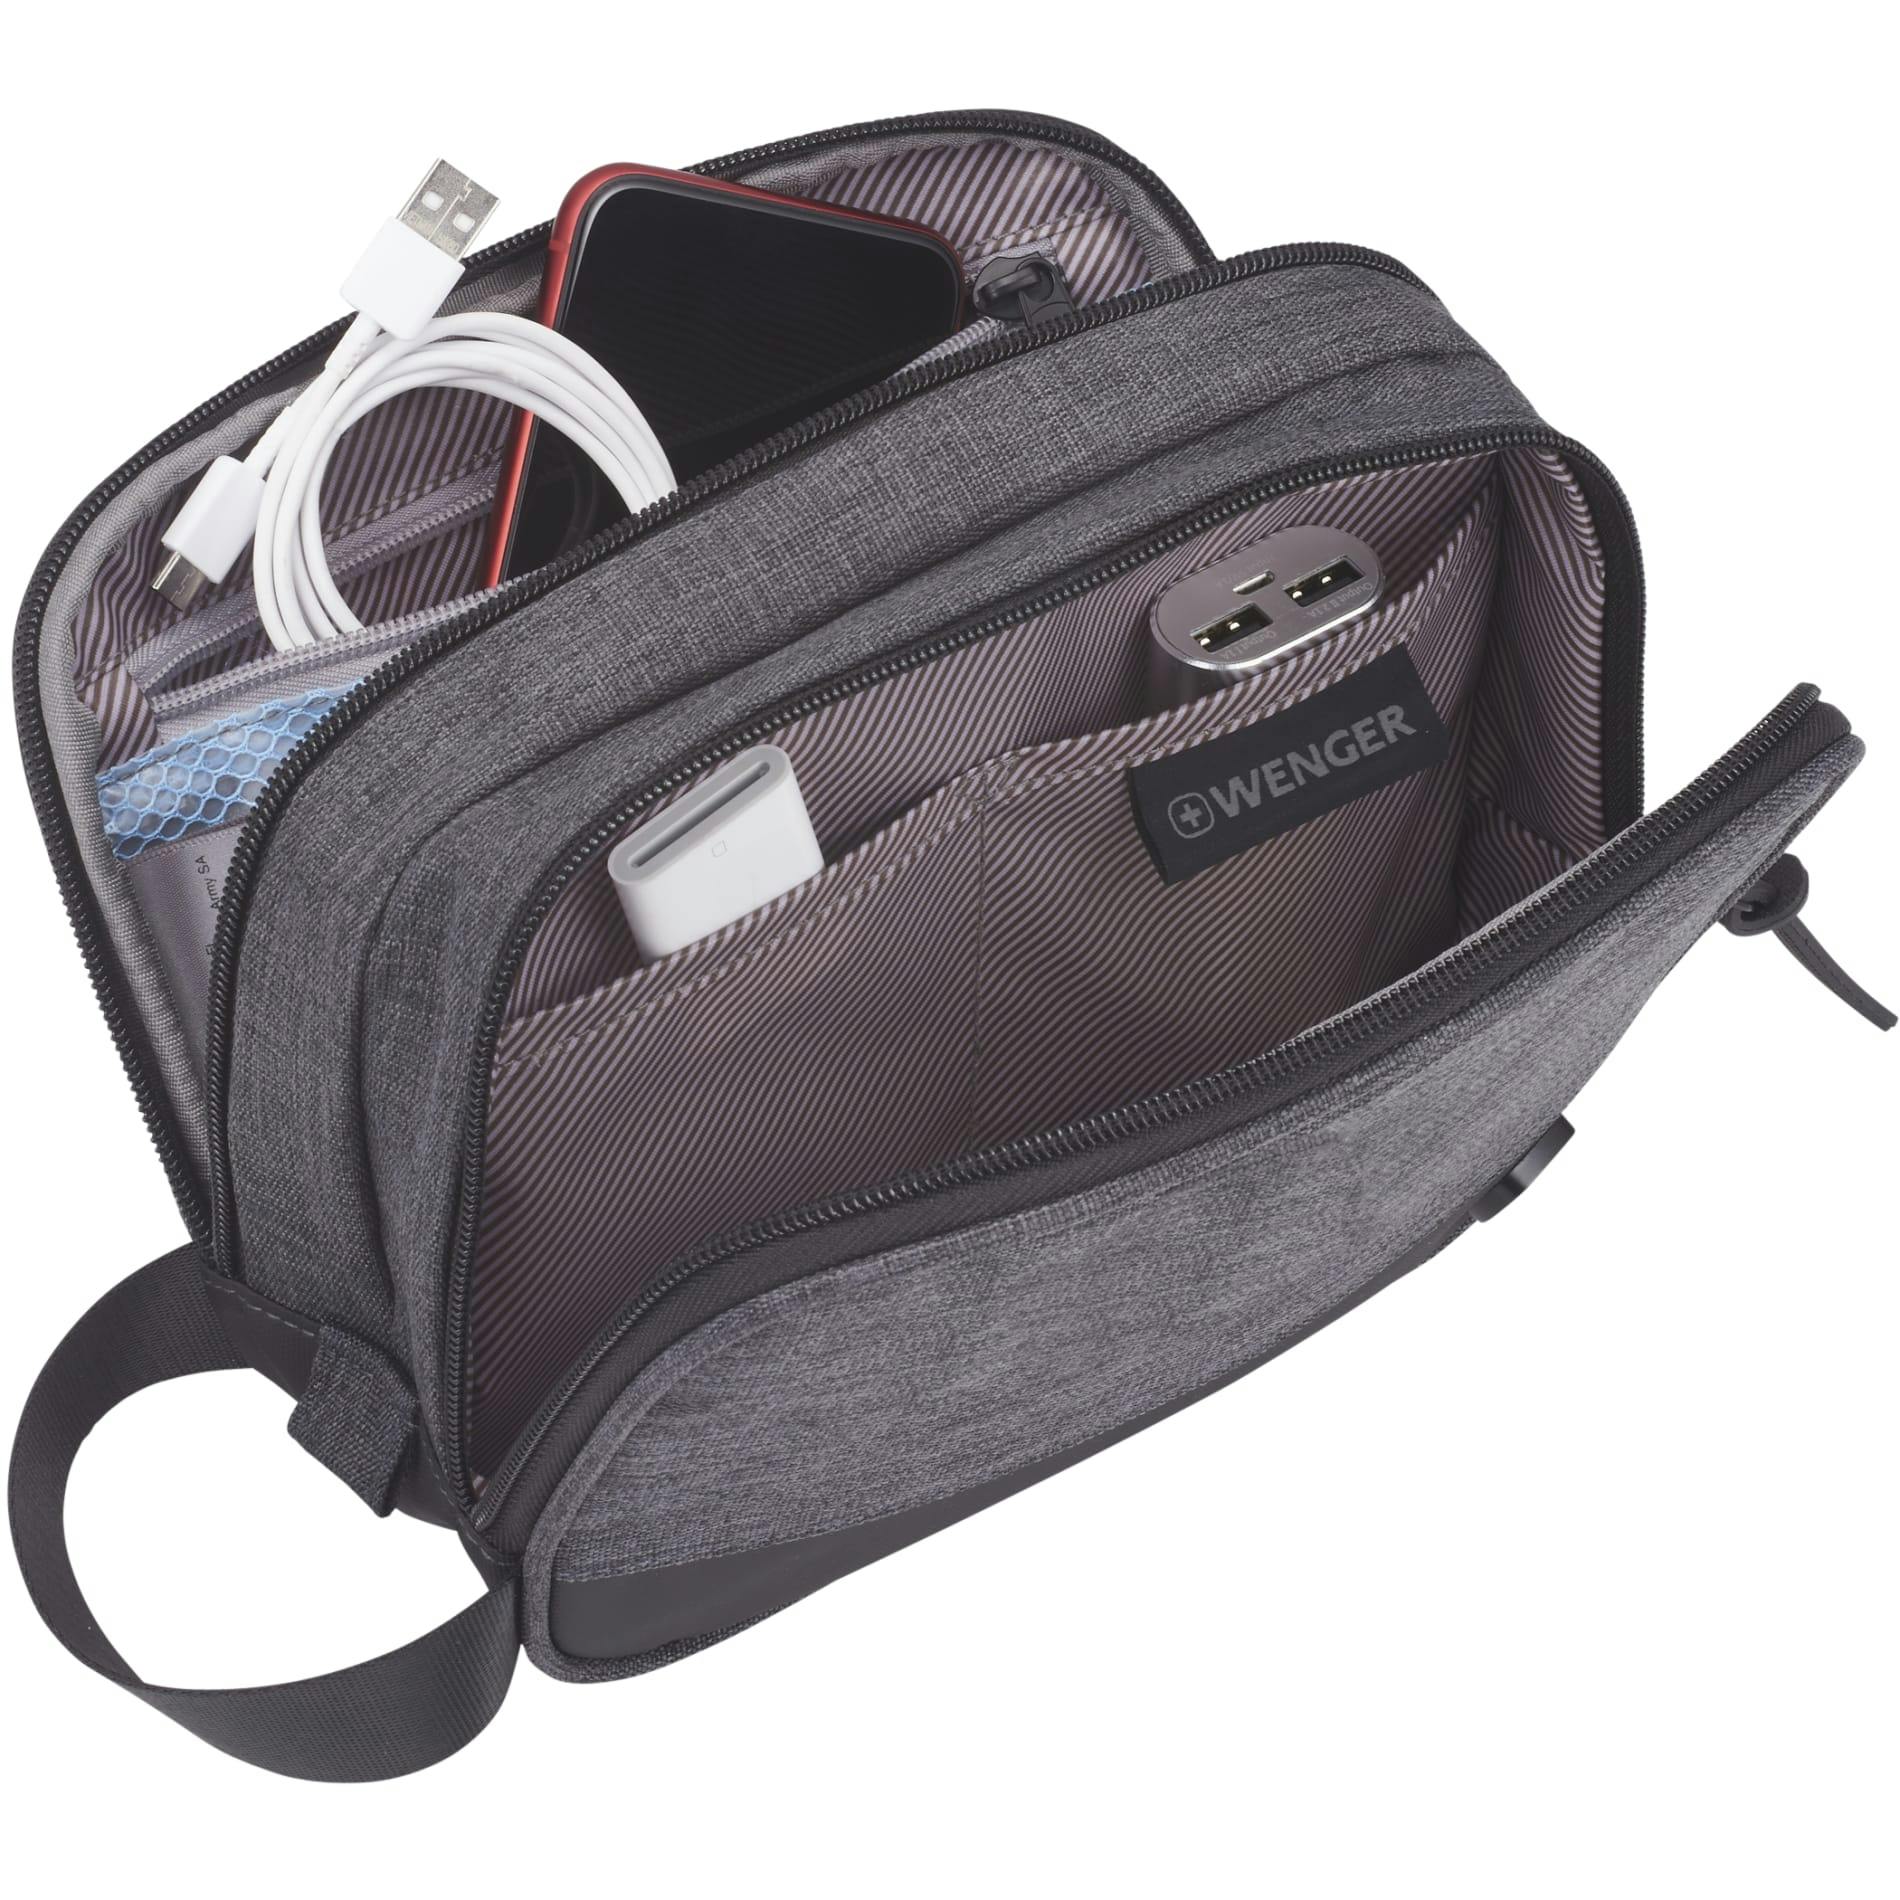 Wenger RPET Dual Compartment Dopp Kit - additional Image 2